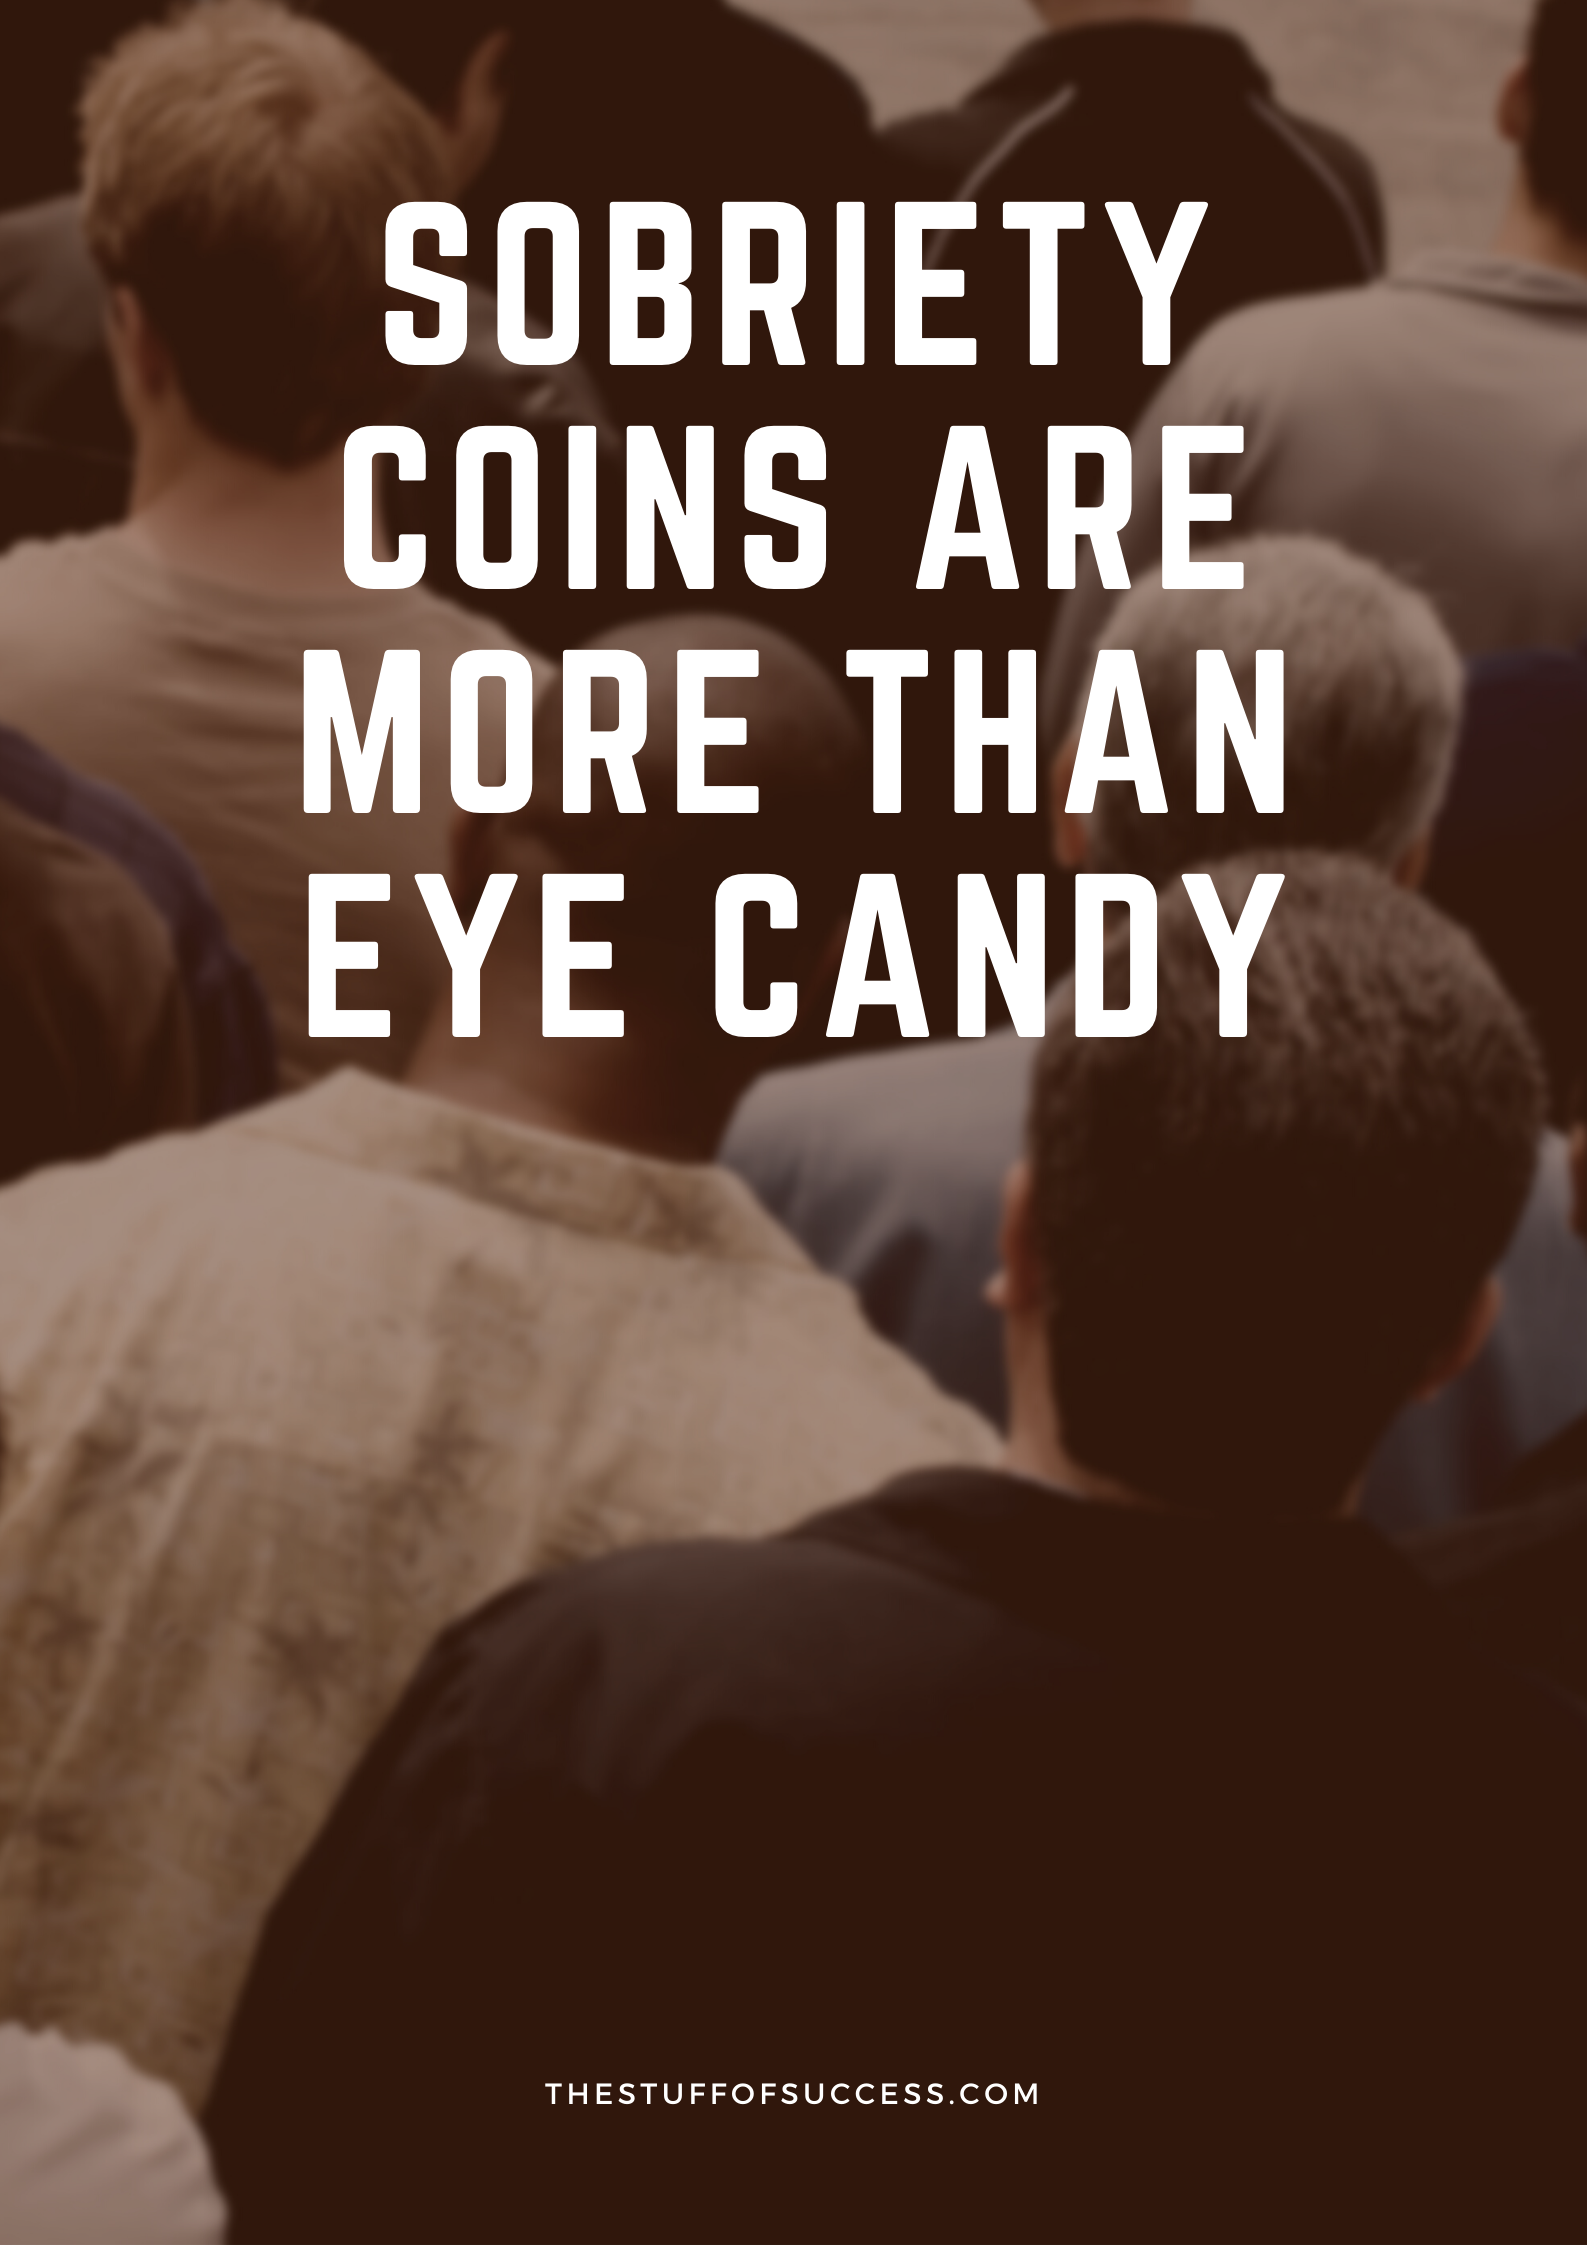 Sobriety Coins Are More Than Eye Candy